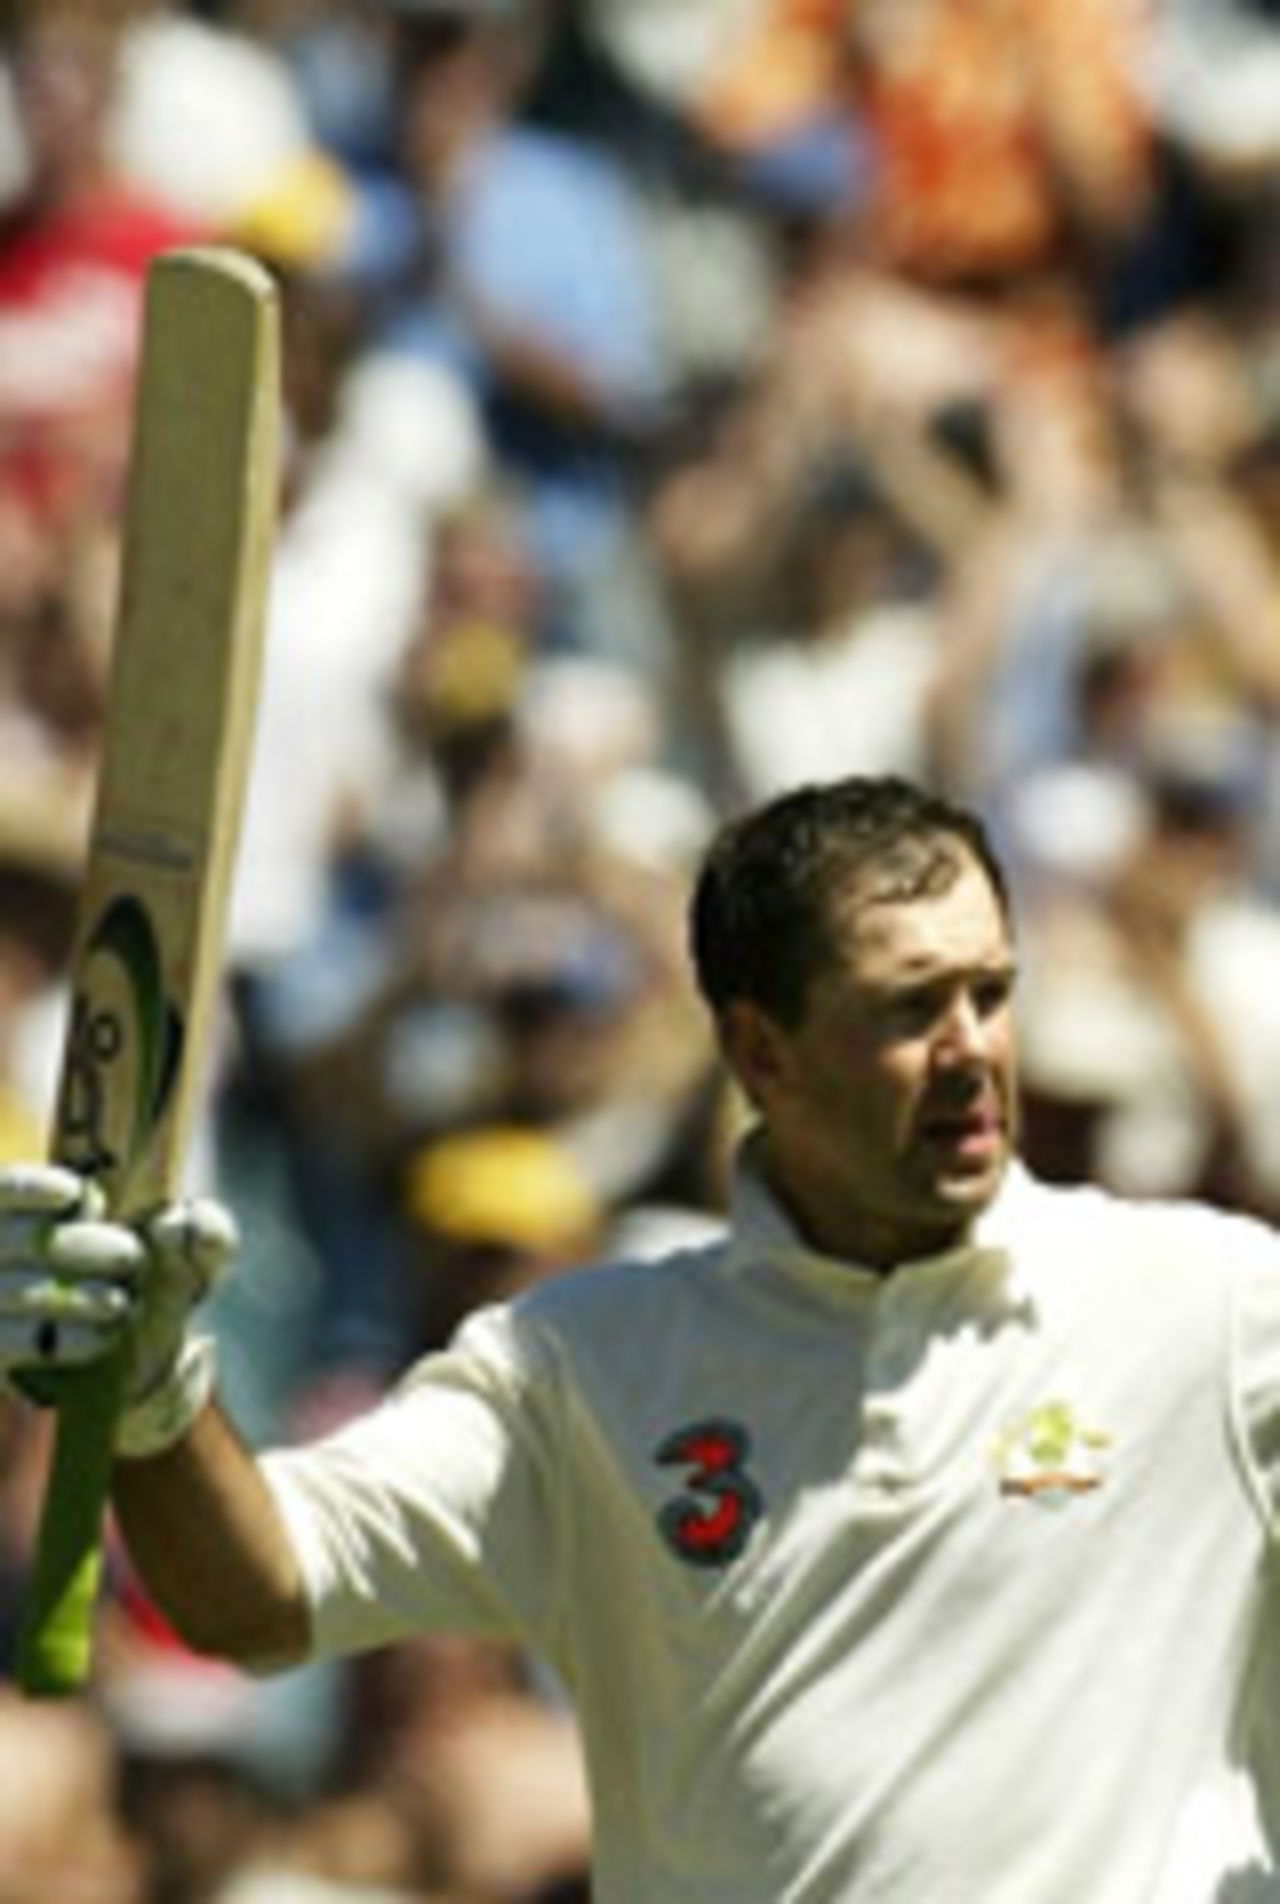 Ricky Ponting raises his bat after the double-century, 3rd Test, Melbourne, 3rd day, December 28, 2003